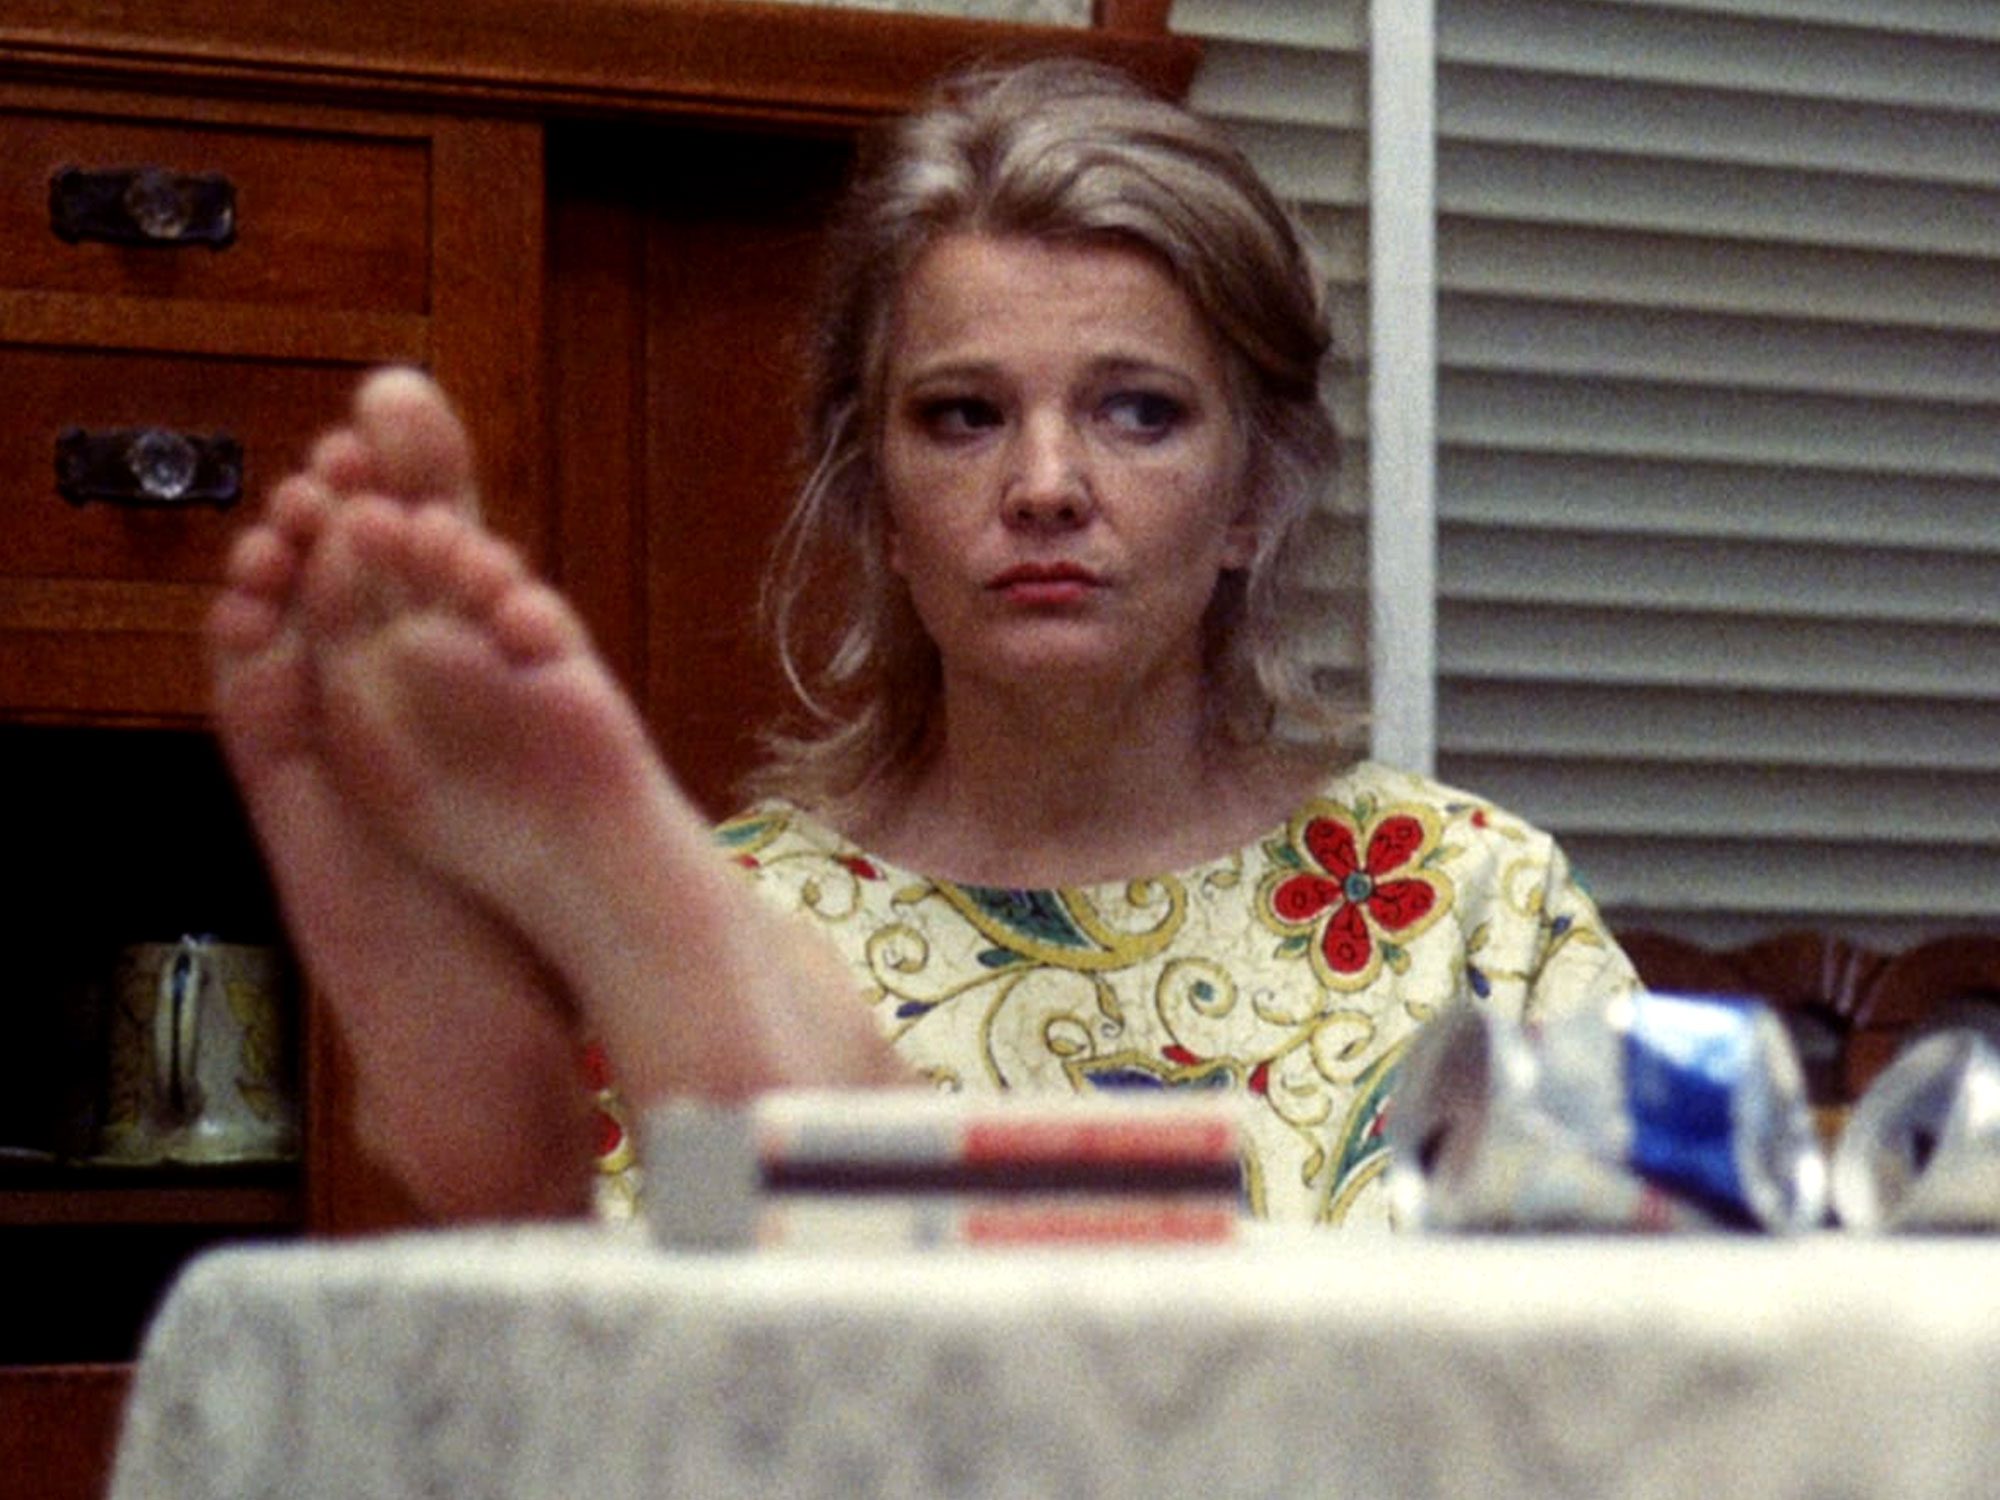 Why I love Gena Rowlands' performance in A Woman Under the Influence